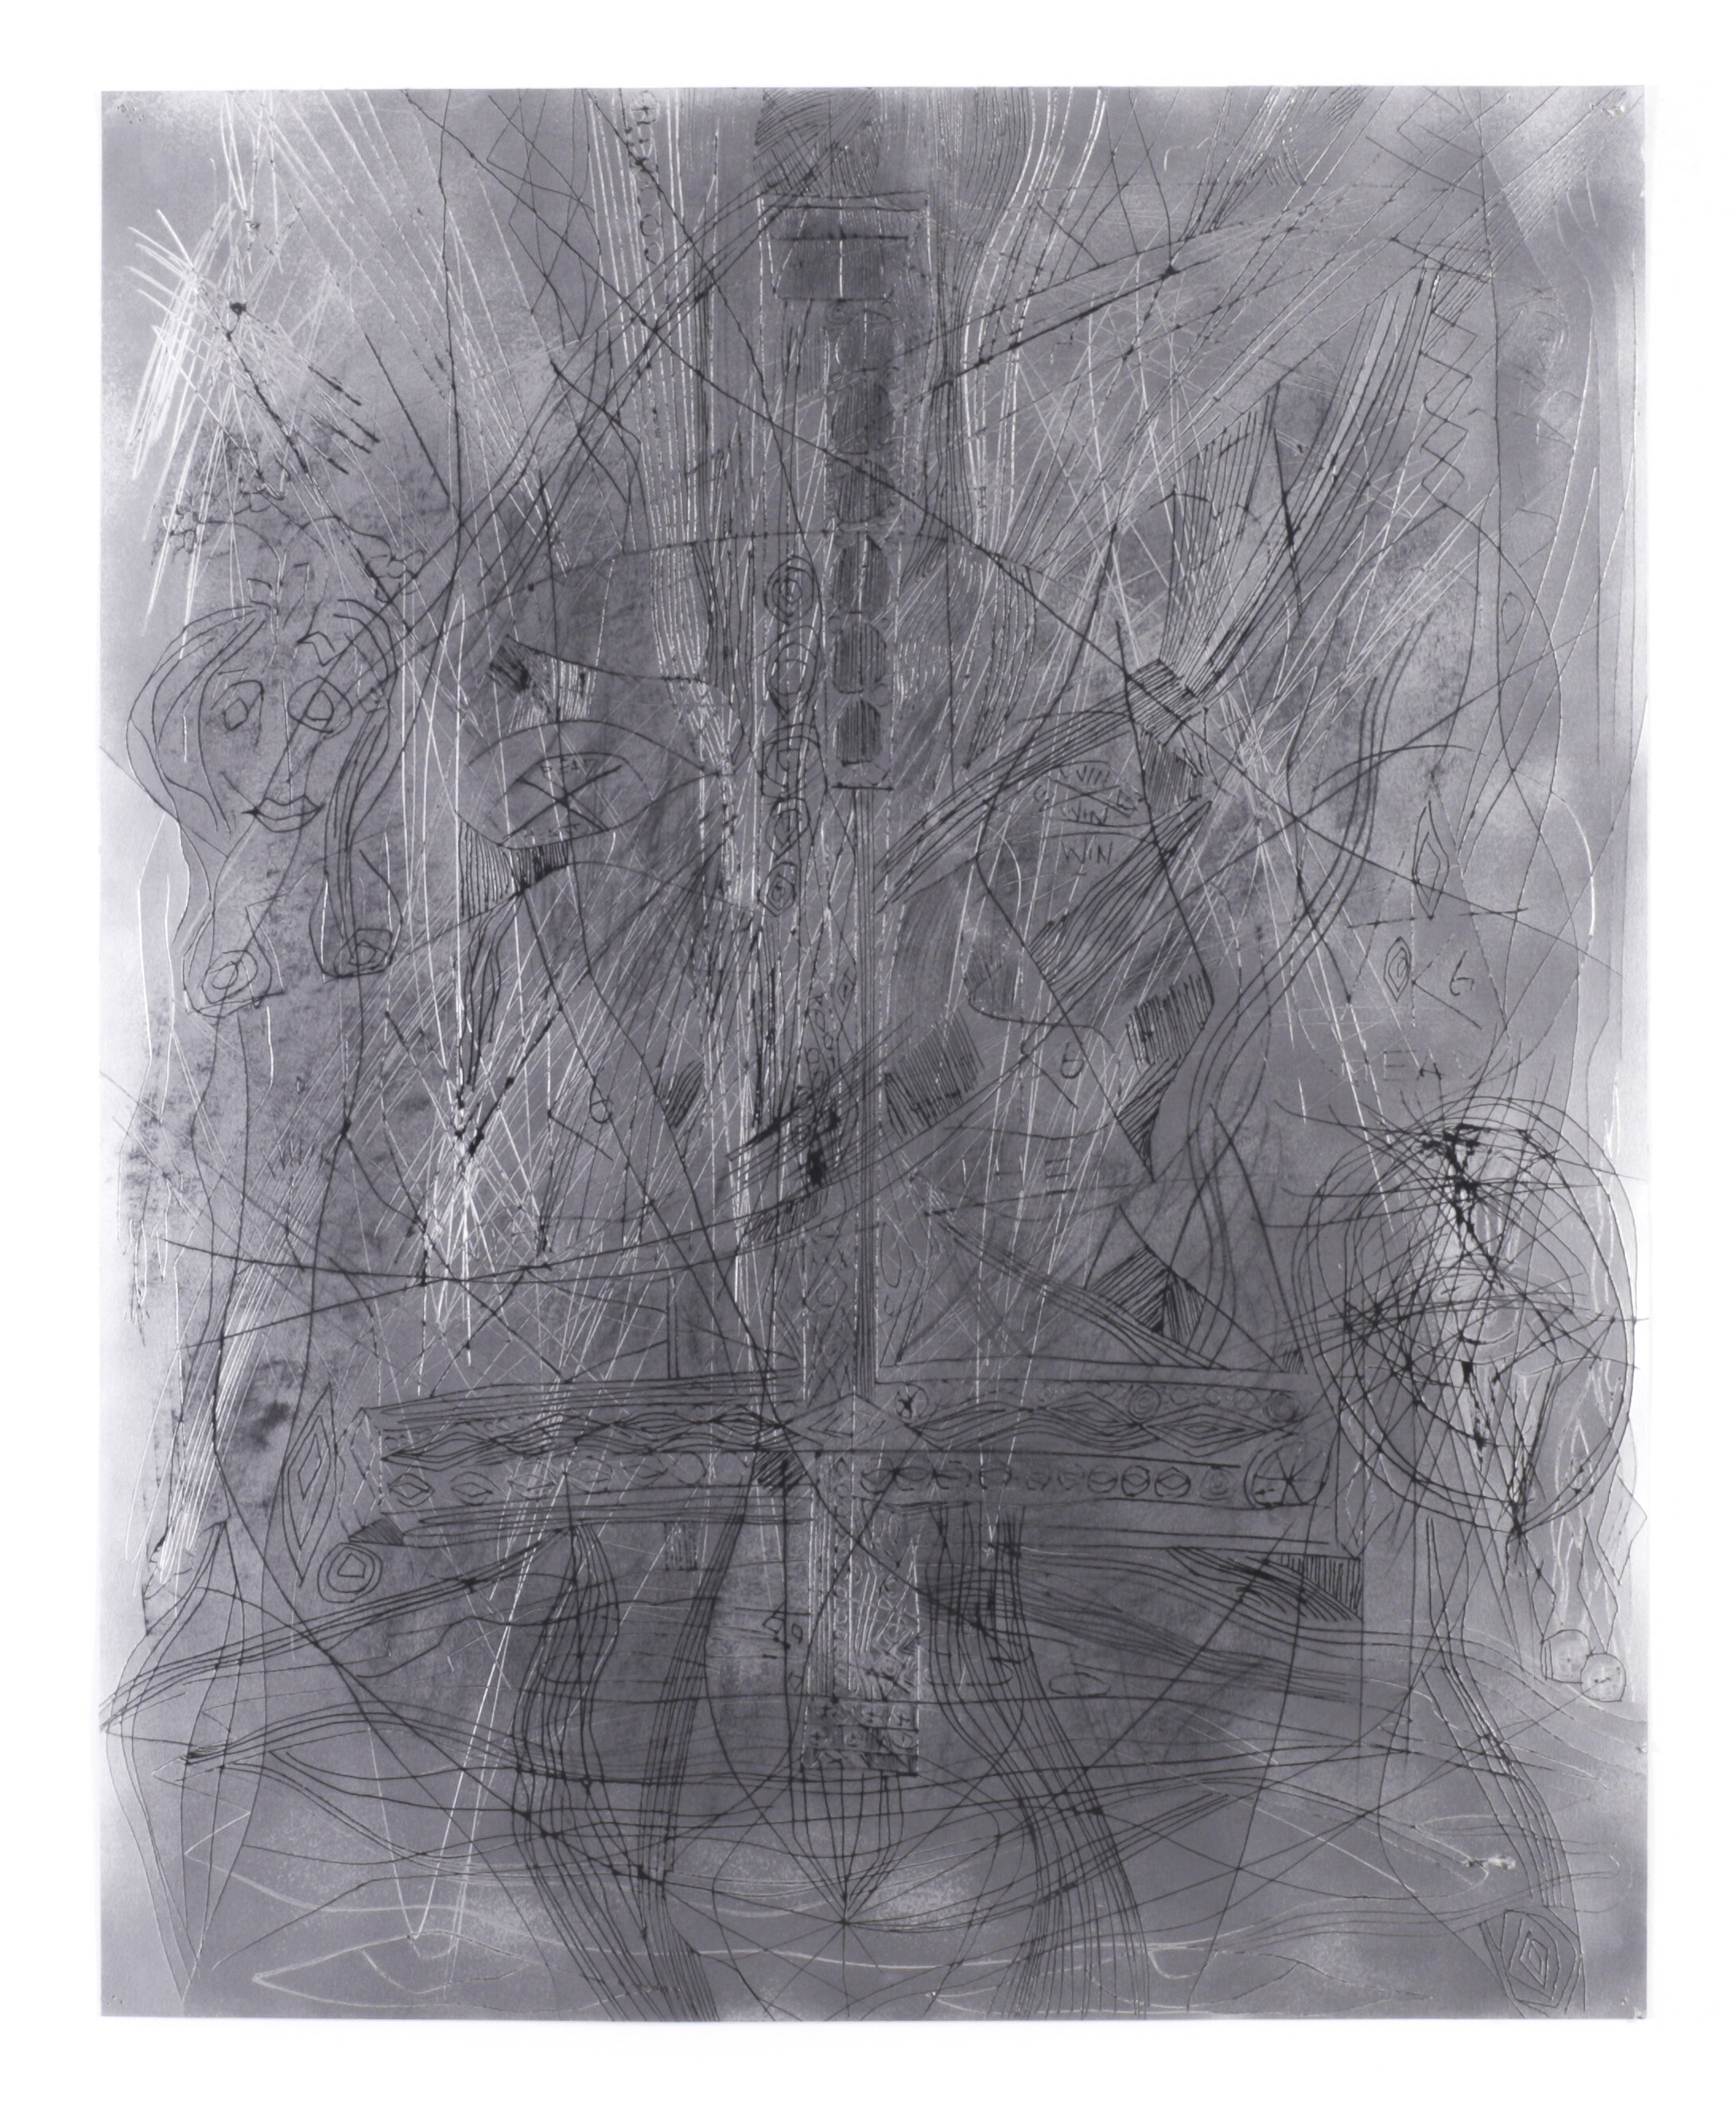 Untitled, 2017 - Spray paint, charcoal  on etched paper - 30 x 25 inches